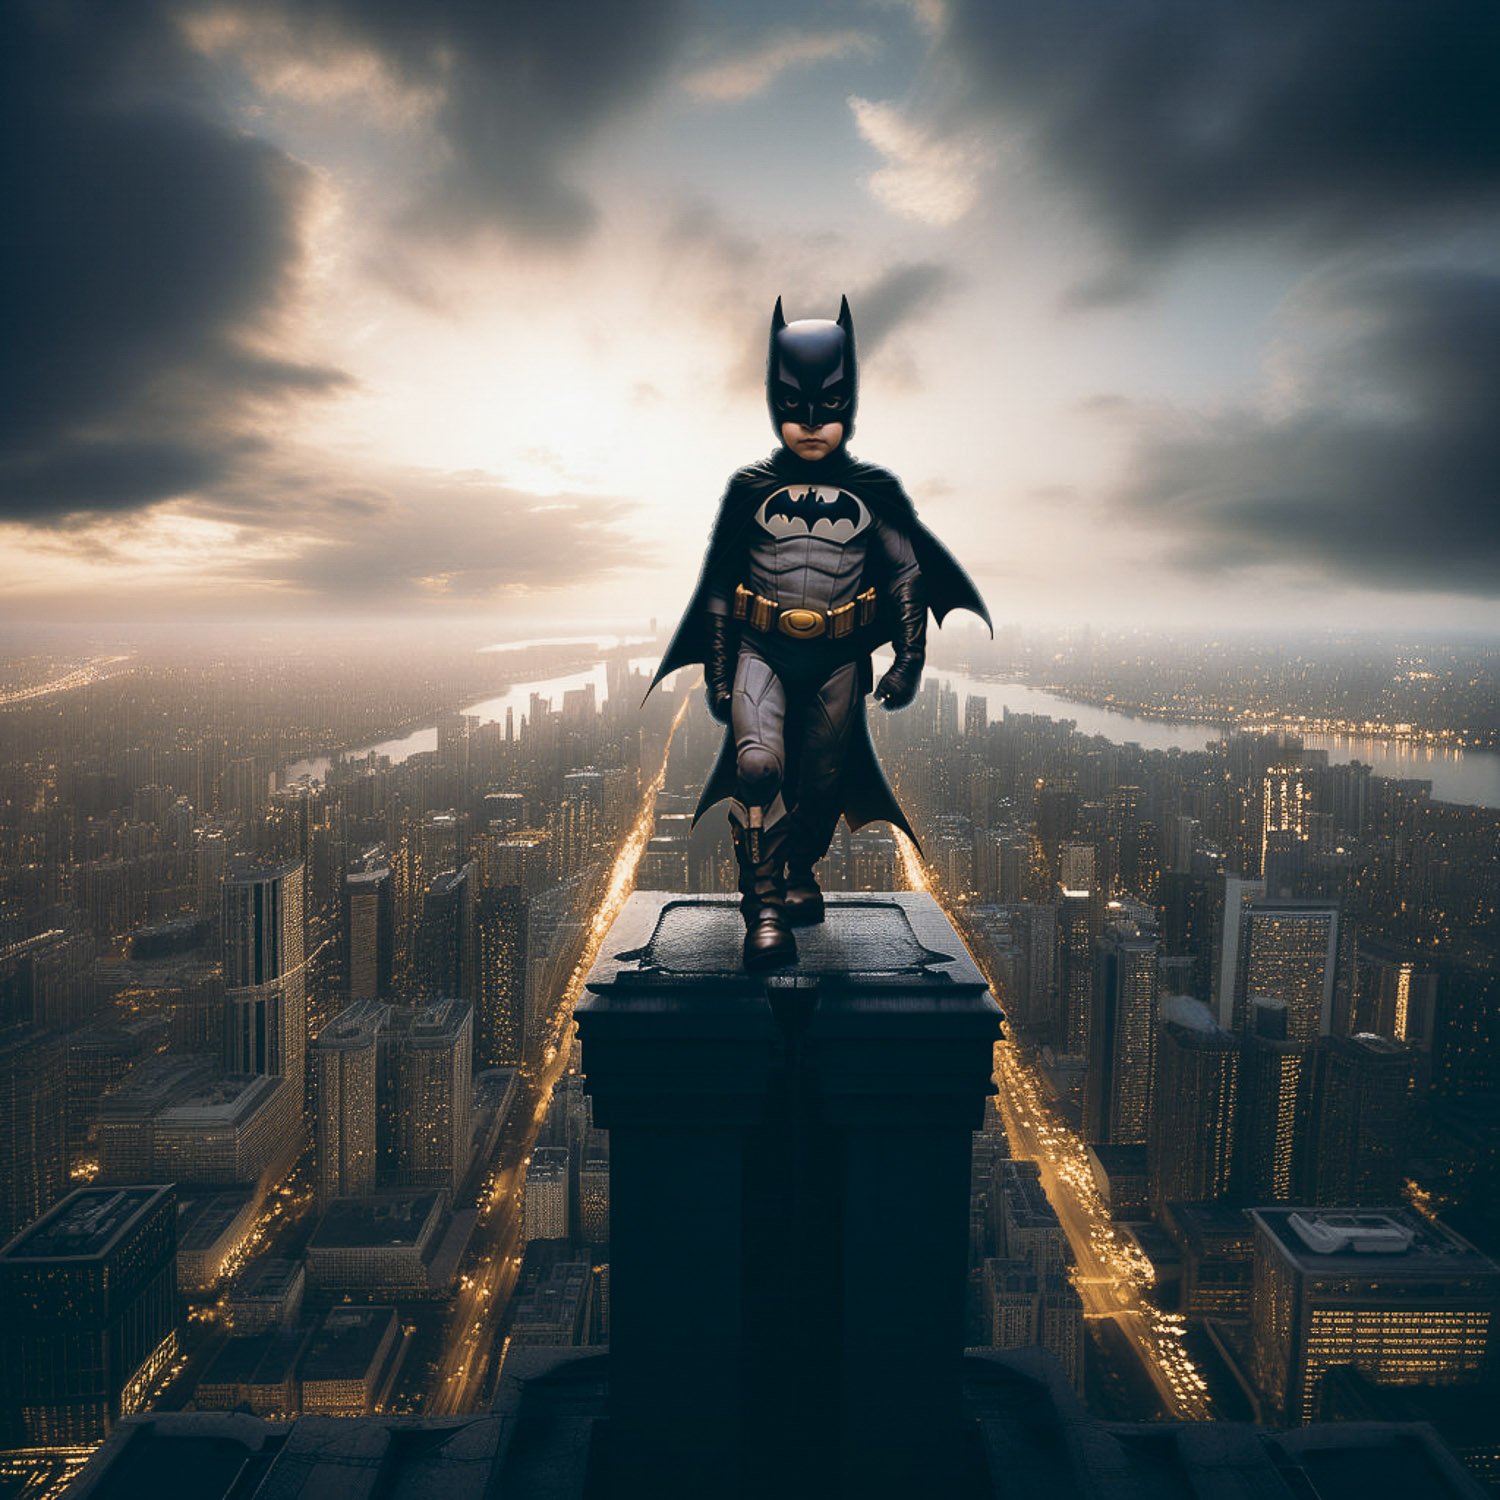 Young boy in Batman costume standing on top of city building